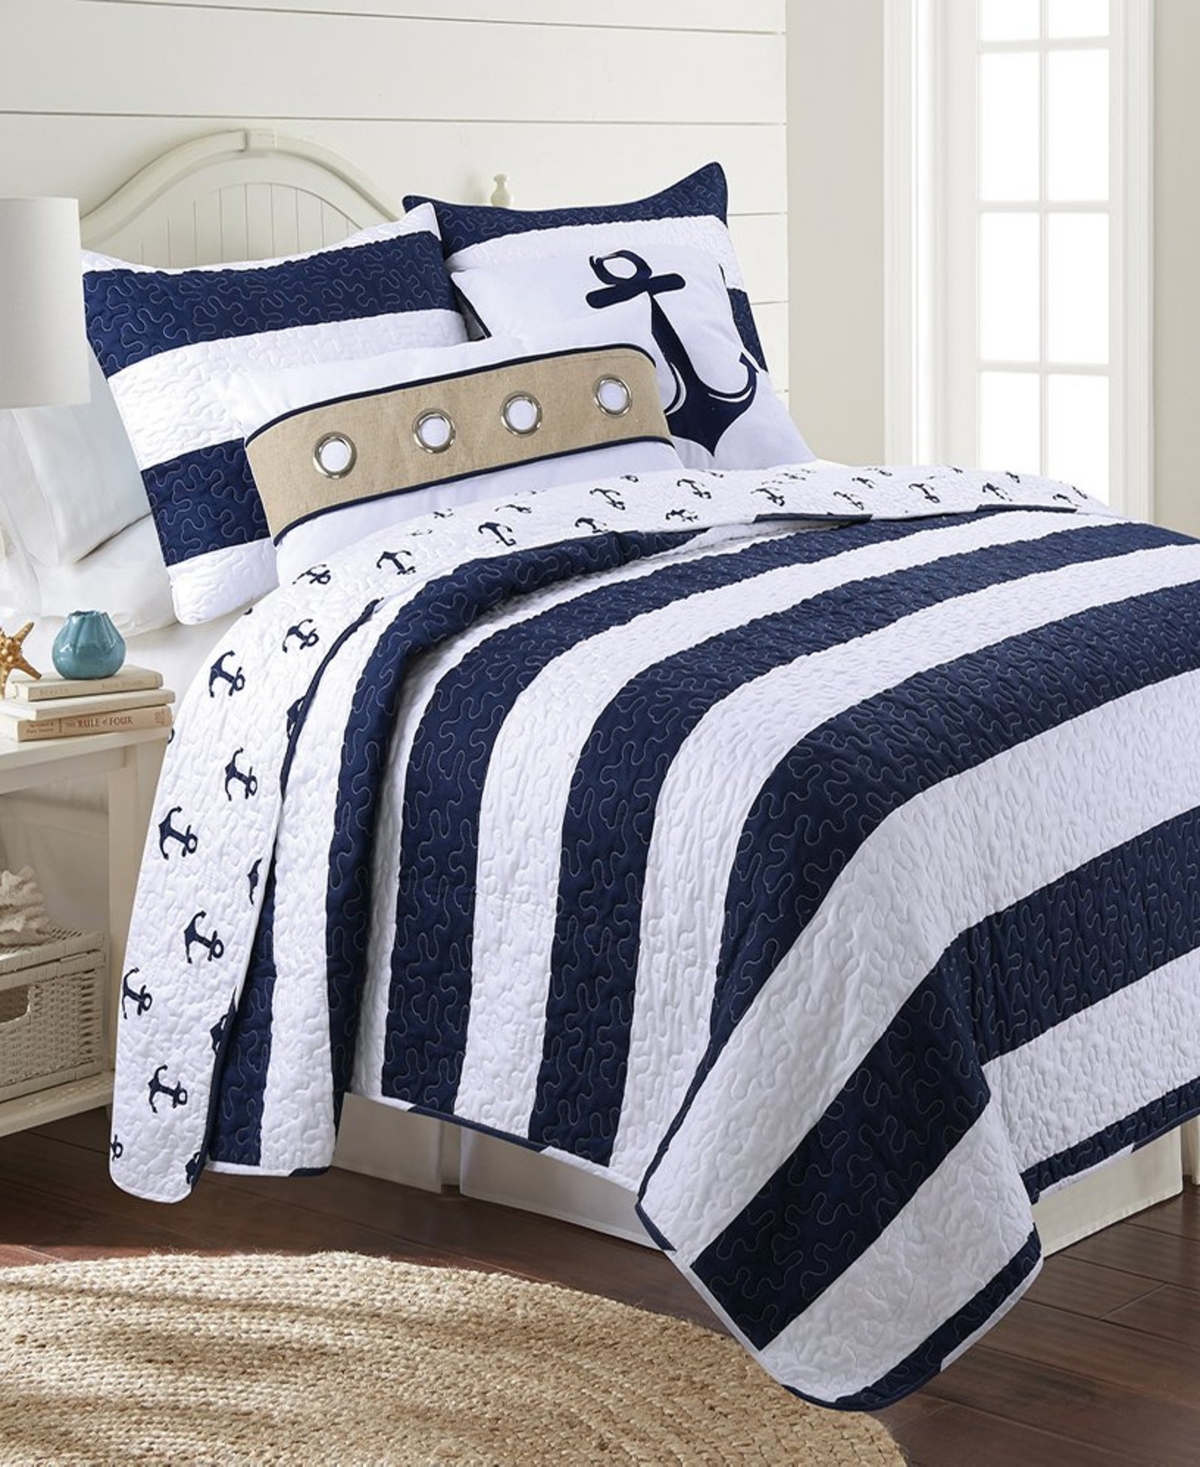 Elise And James Home Hallie Nautical Reversible 3-piece Quilt Set, Queen In Navy